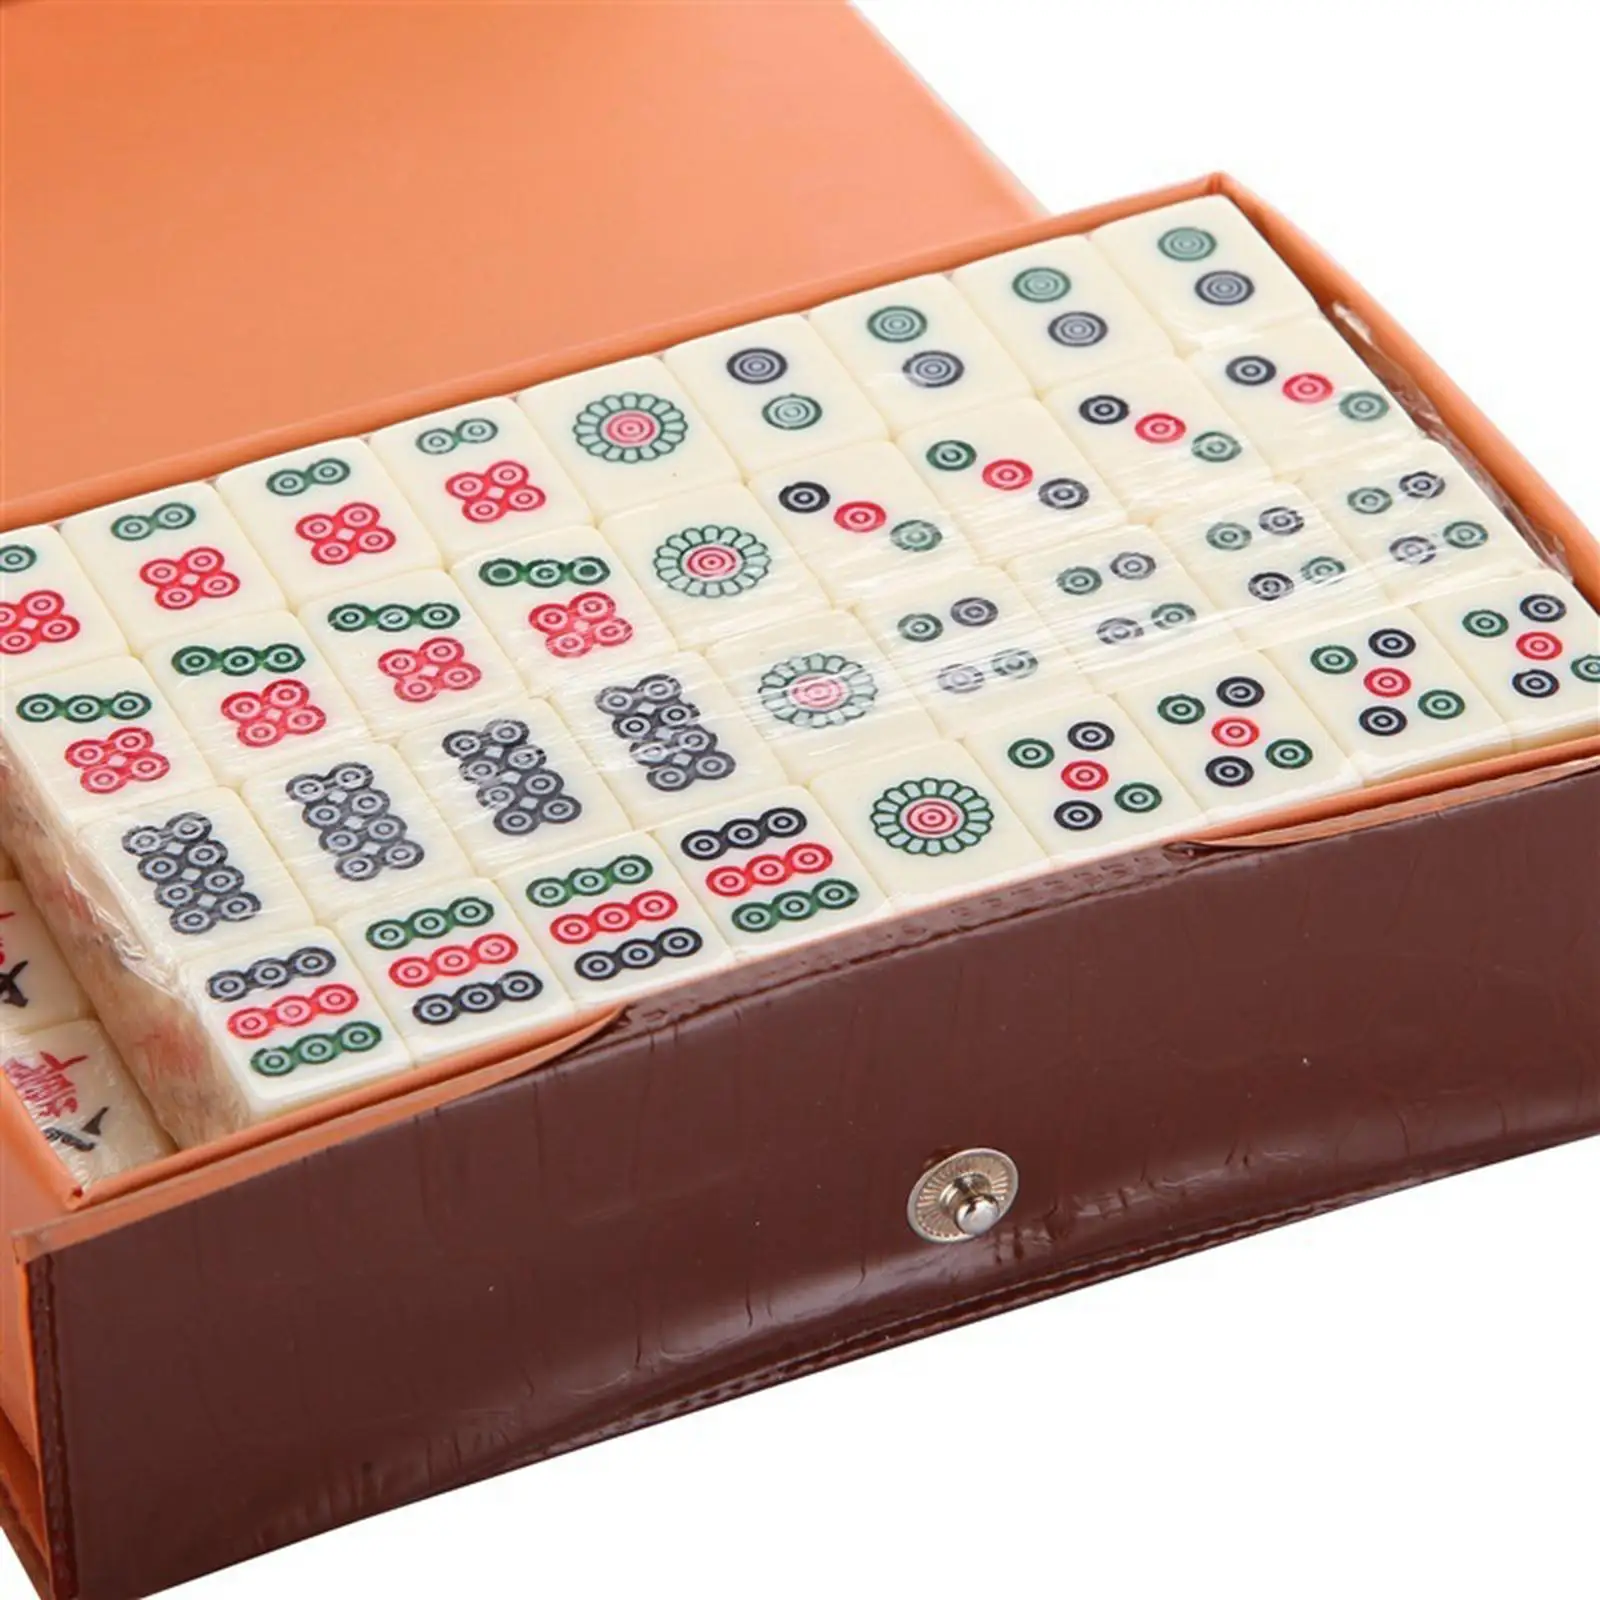 Portable Travel Mahjong Set 144 Sheets classic tiles Games Chinese Mahjong Game Set for Travel Party Boys and Girls Adults Kids